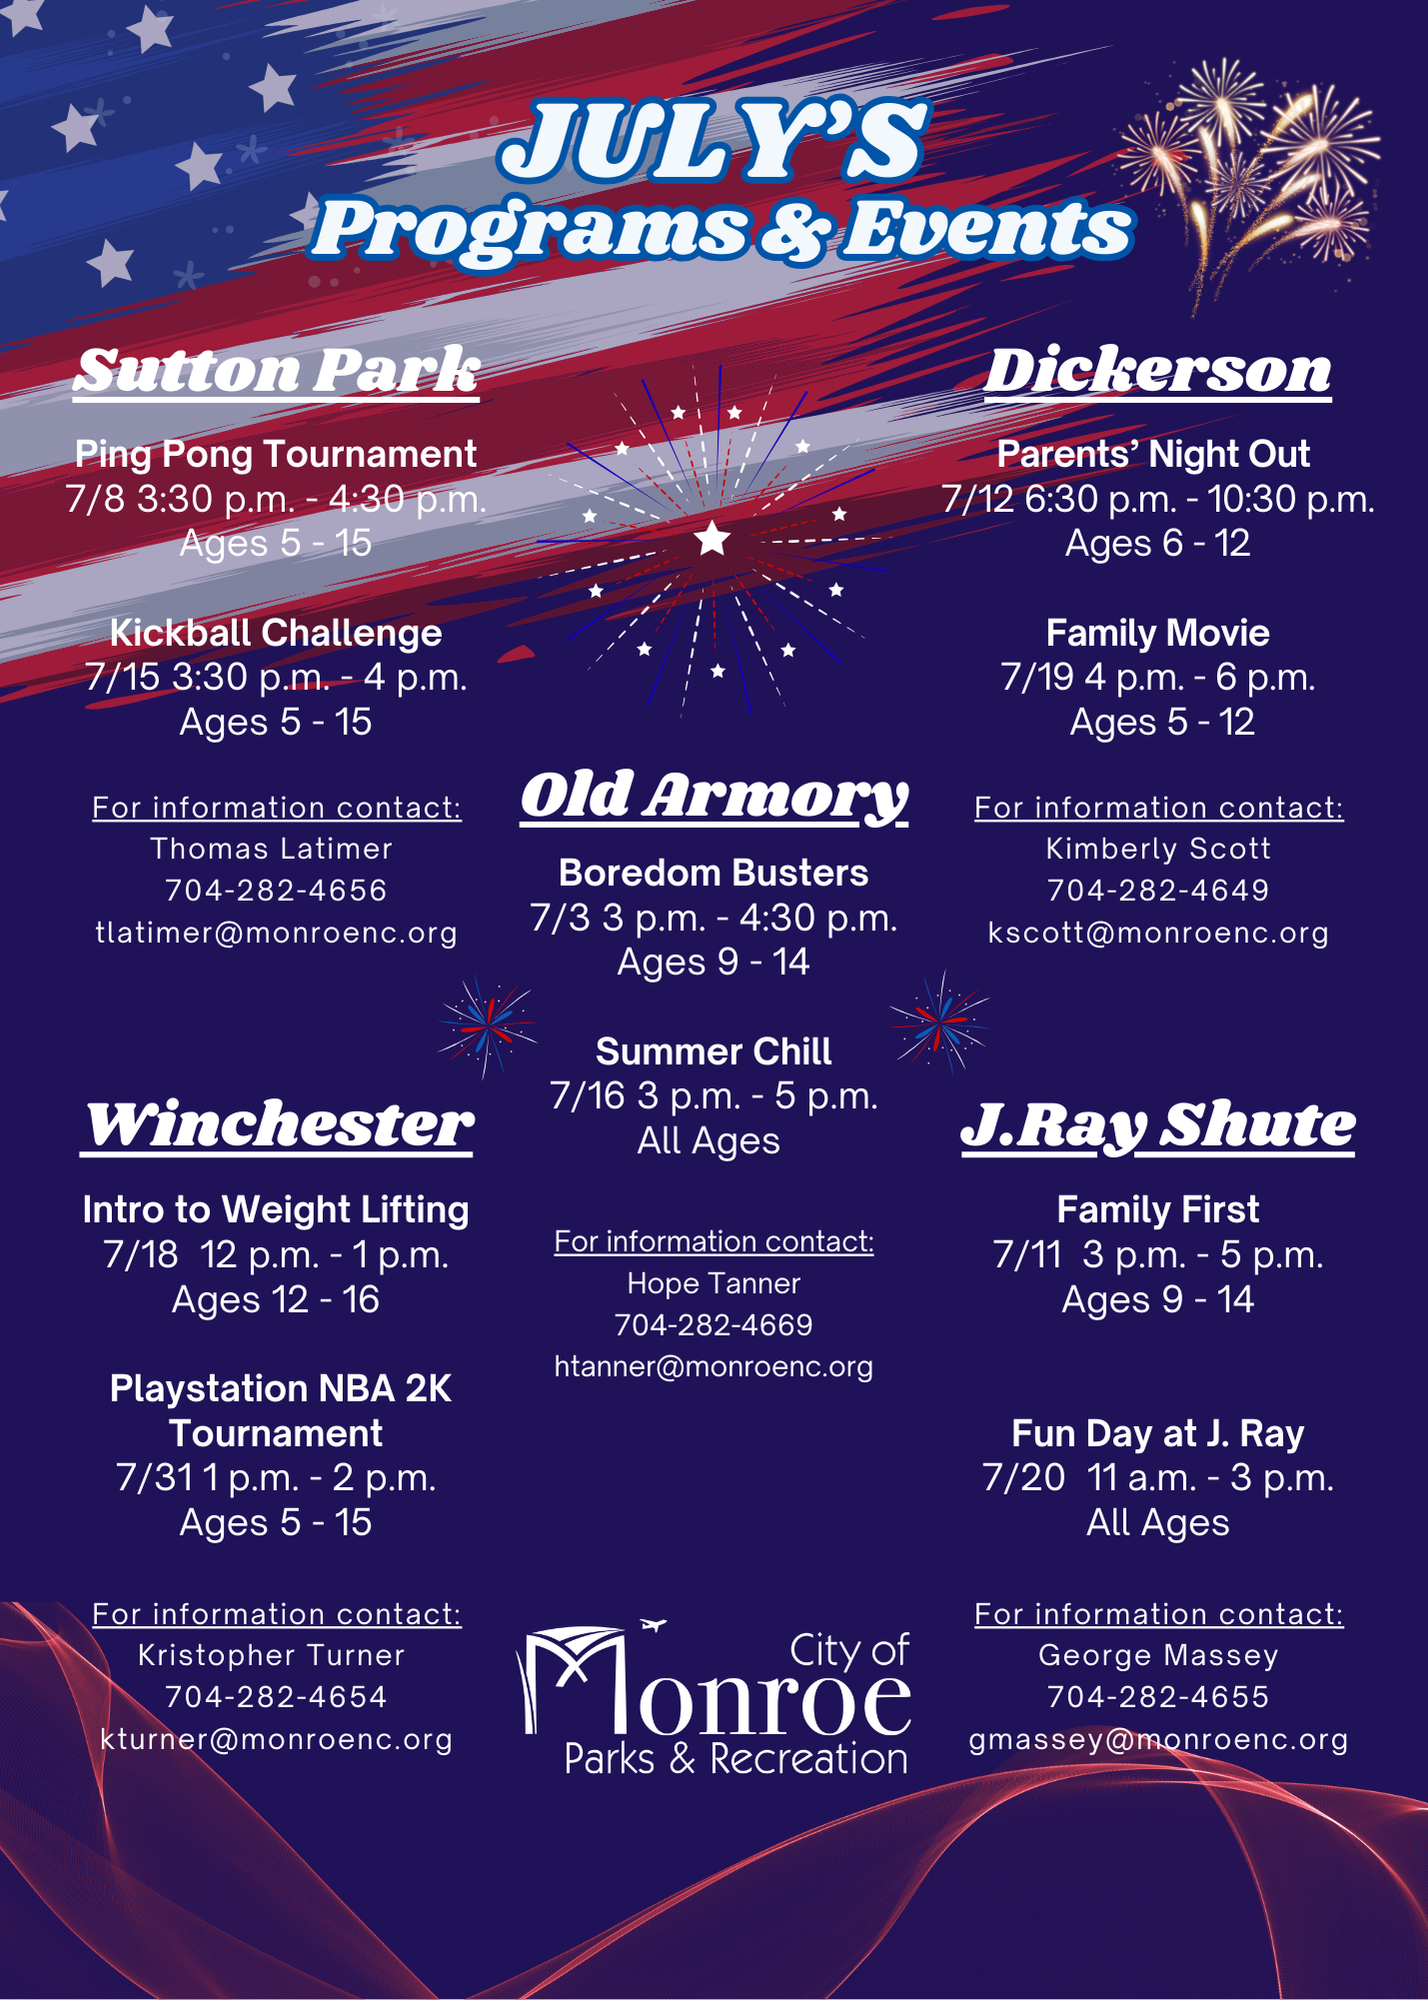 A list of events in July at Monroe community centers.